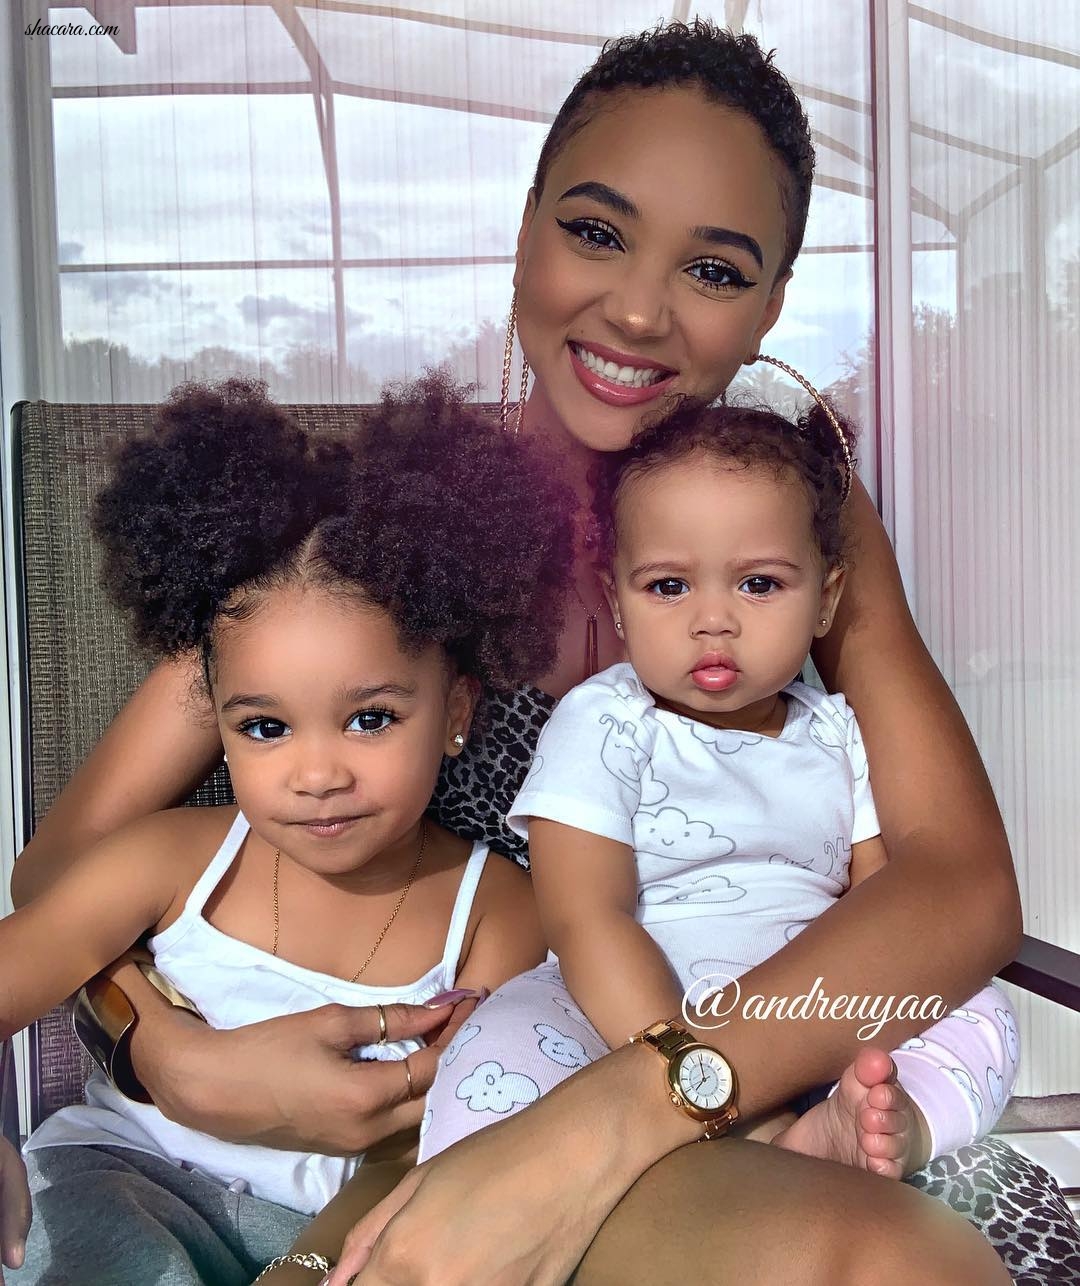 Ivorian Singer & Influencer Drea Is Serving Us Some ‘NOT FAIR’ Mother Goals; Where Did Those Babies Even Come From?